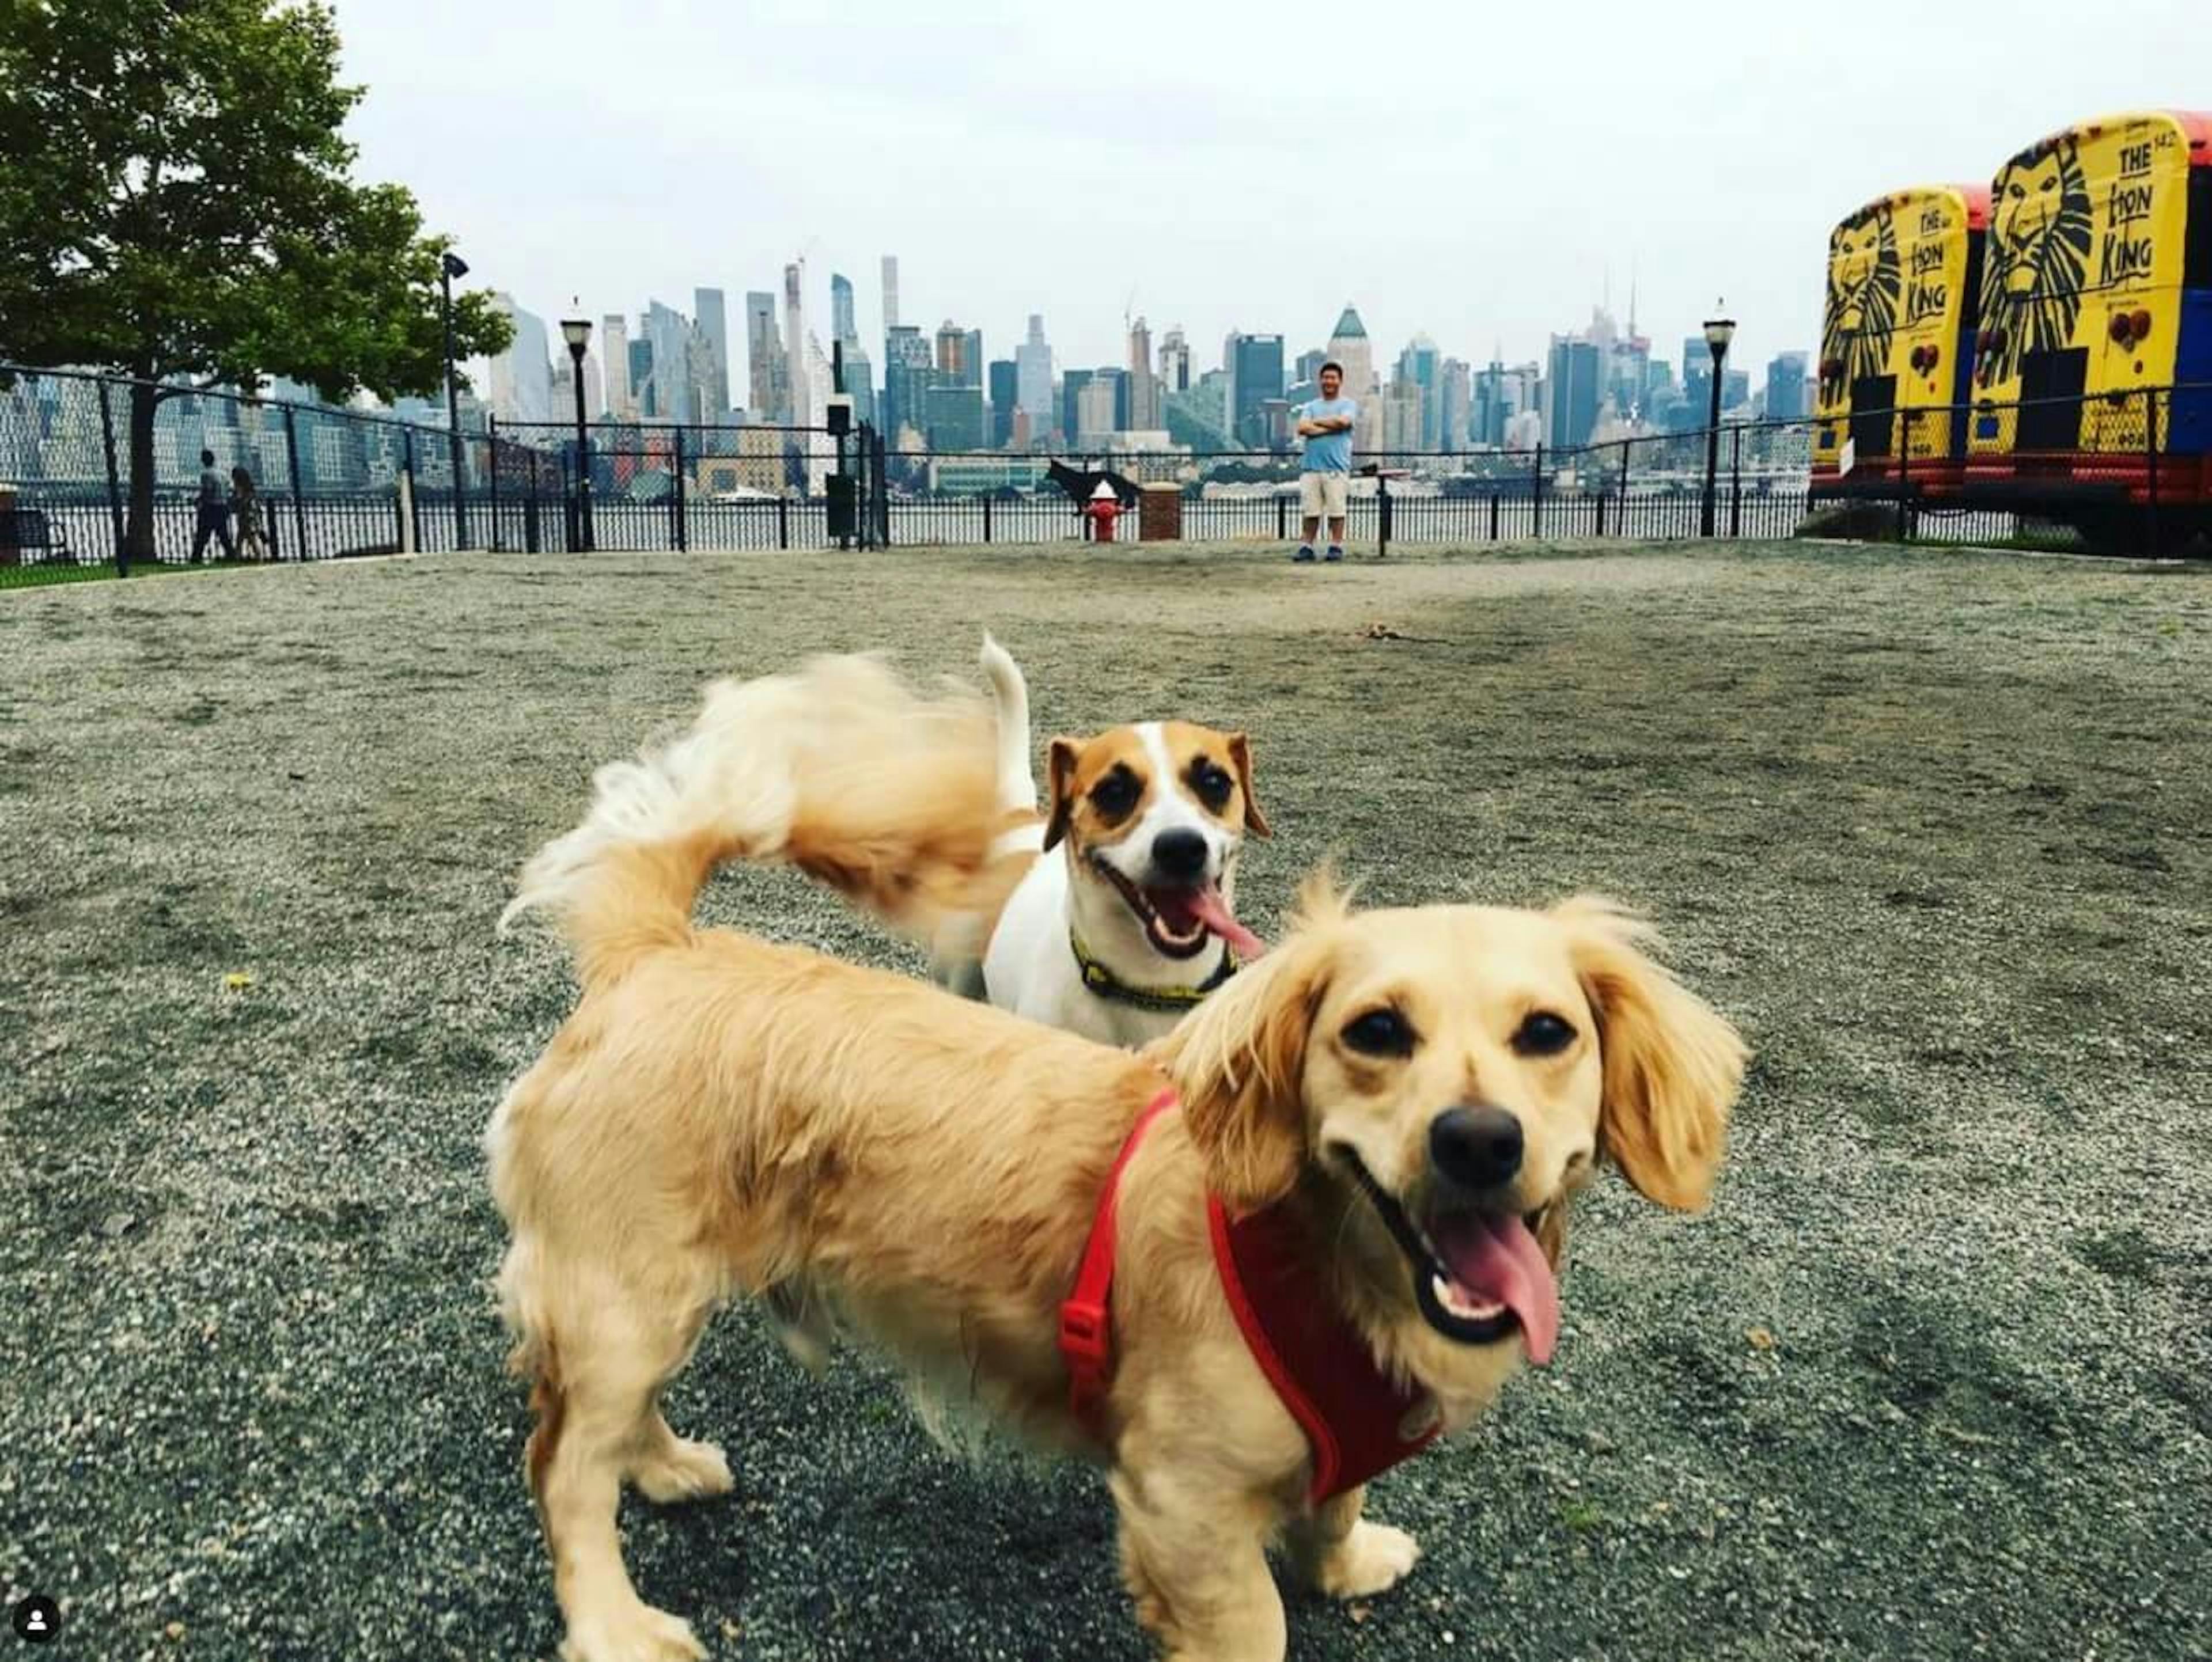 Brooklyn dogs in front of the landmark building and subway station